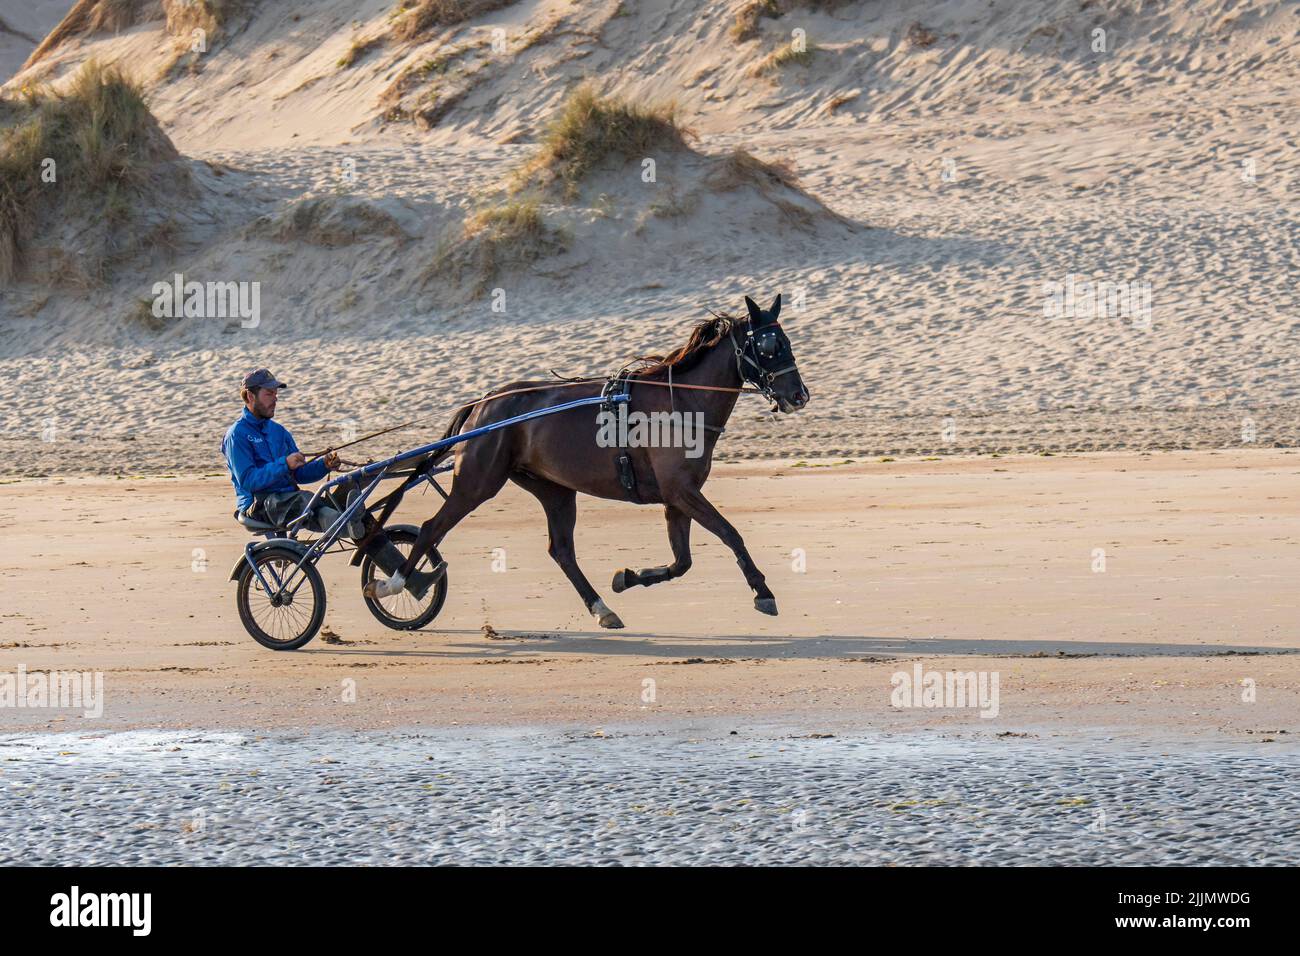 Harness racing horse trotting on the beach, showing driver riding a two-wheeled cart called a sulky Stock Photo